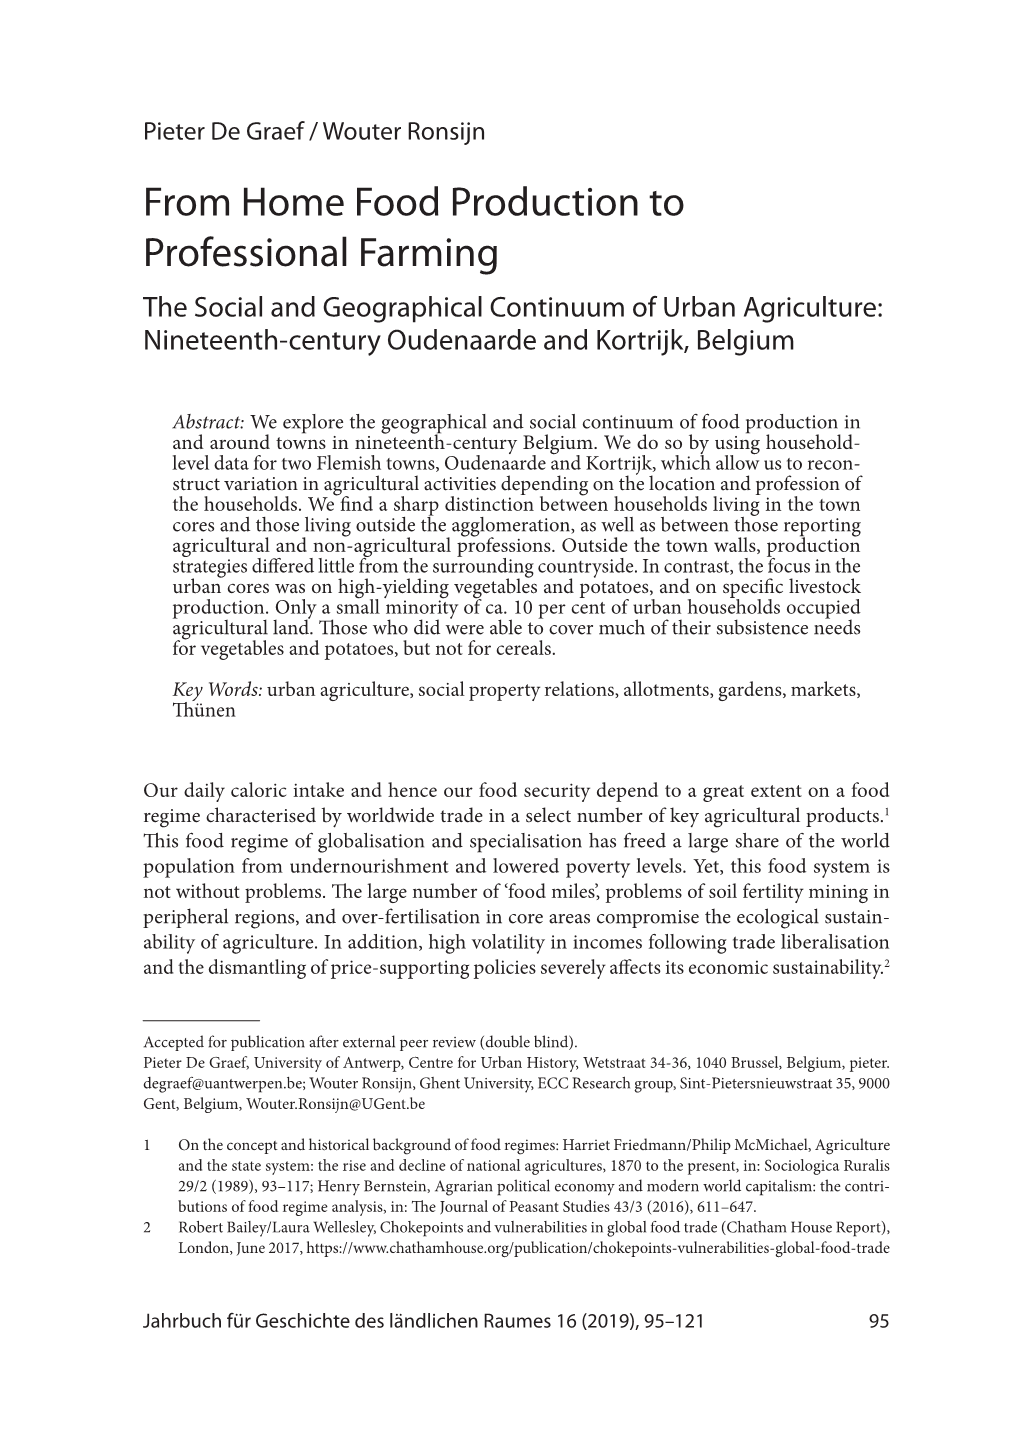 From Home Food Production to Professional Farming the Social and Geographical Continuum of Urban Agriculture: Nineteenth-Century Oudenaarde and Kortrijk, Belgium